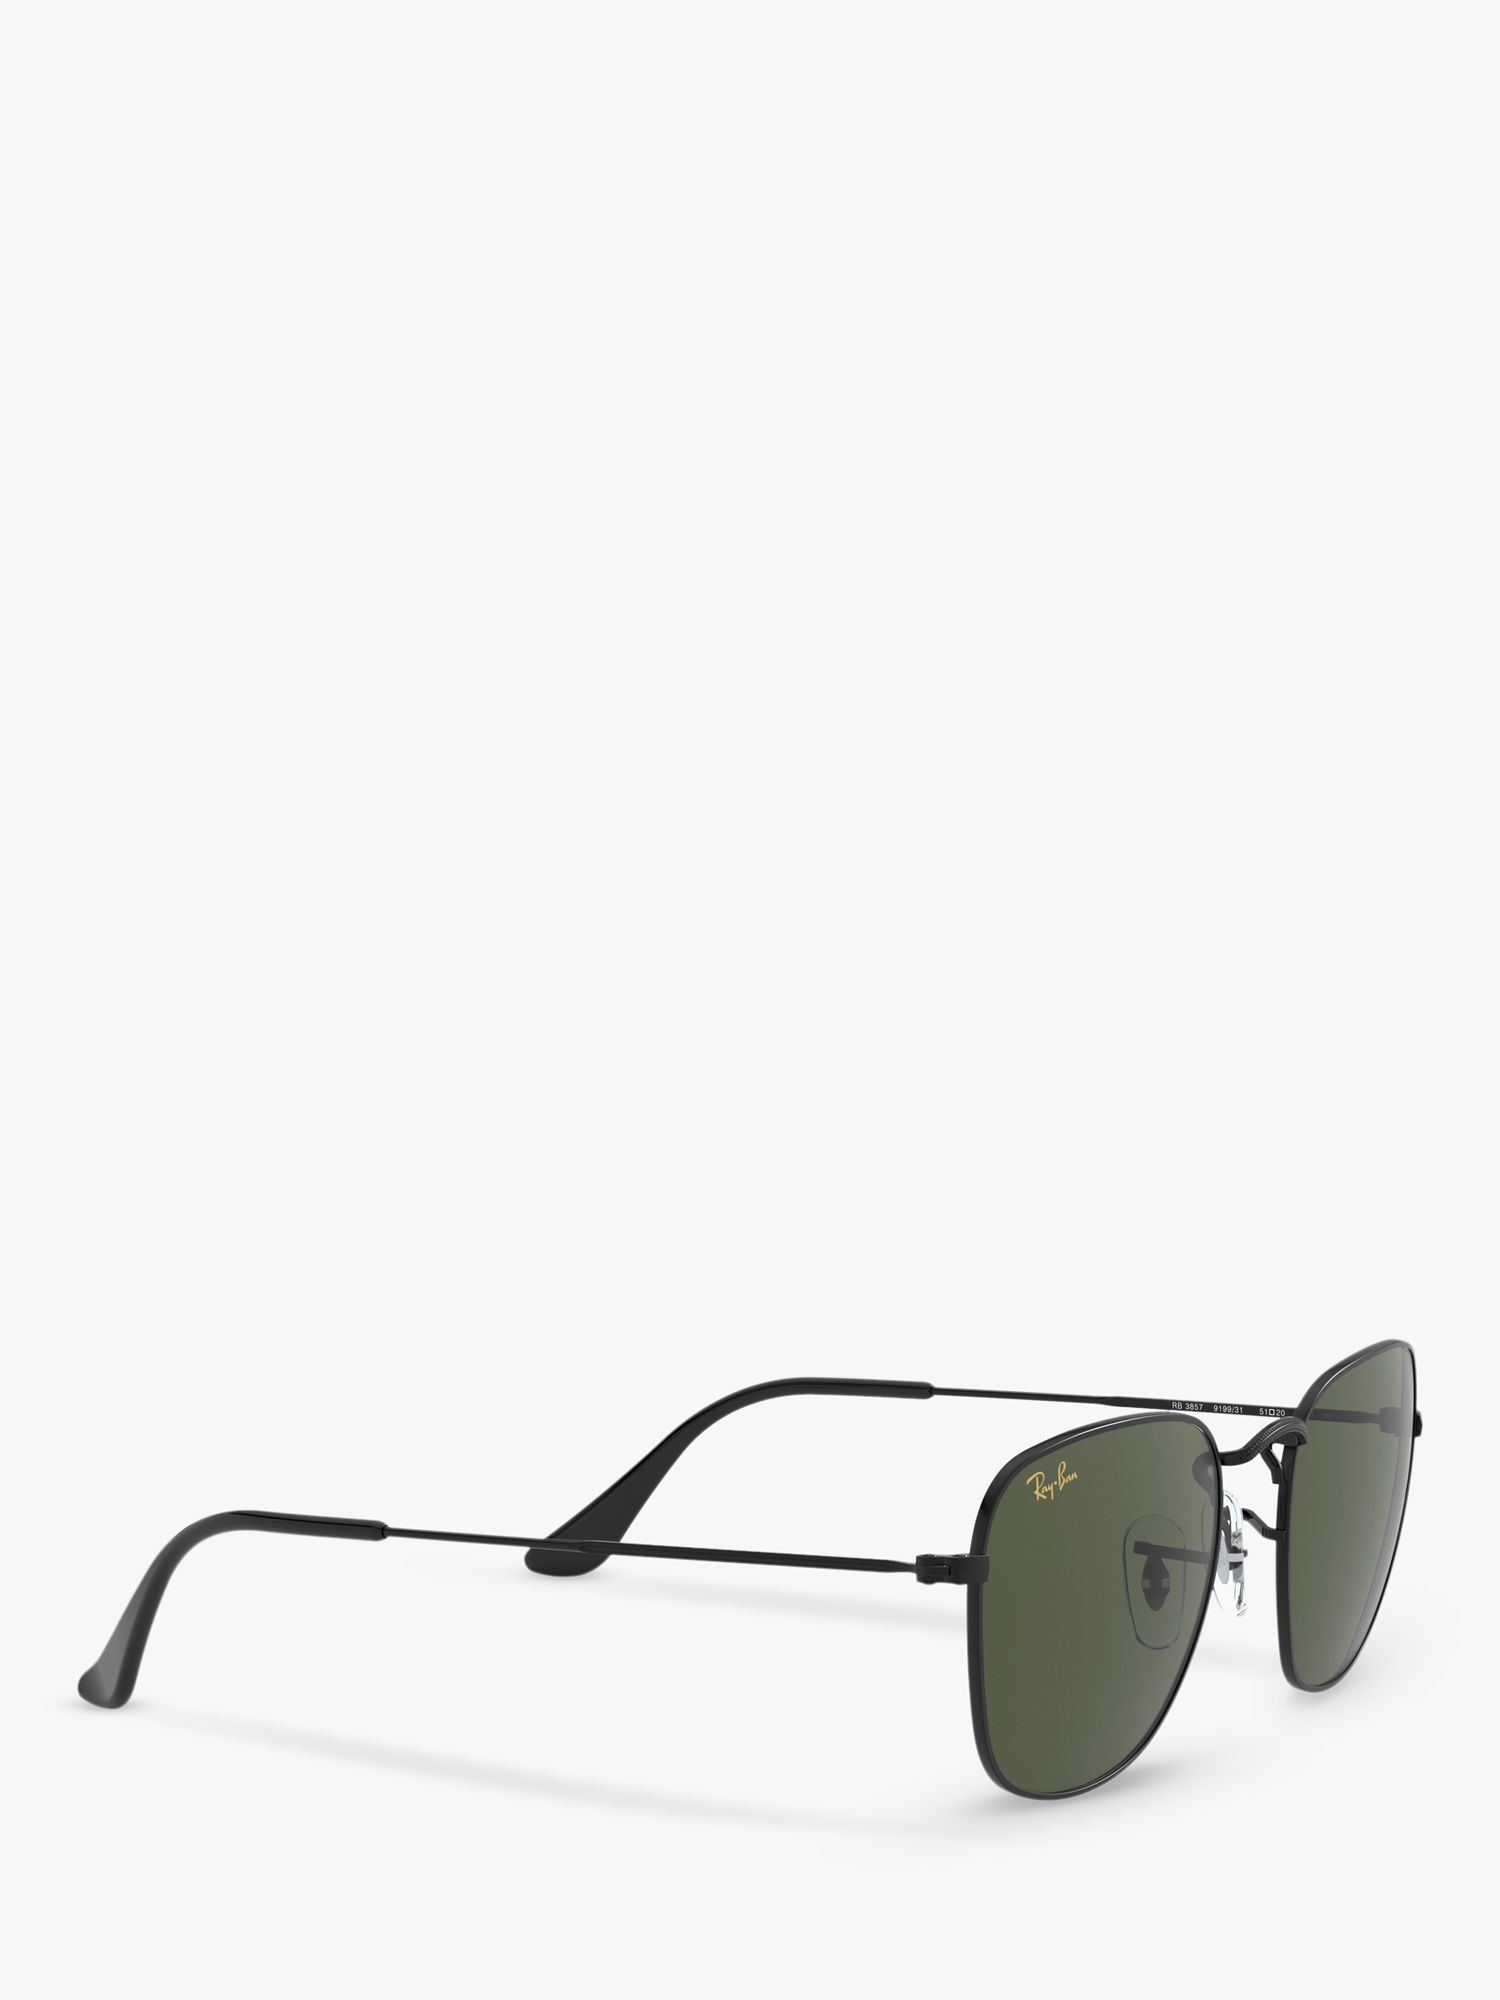 Buy Ray-Ban RB3857 Unisex Square Sunglasses, Black/Green Online at johnlewis.com